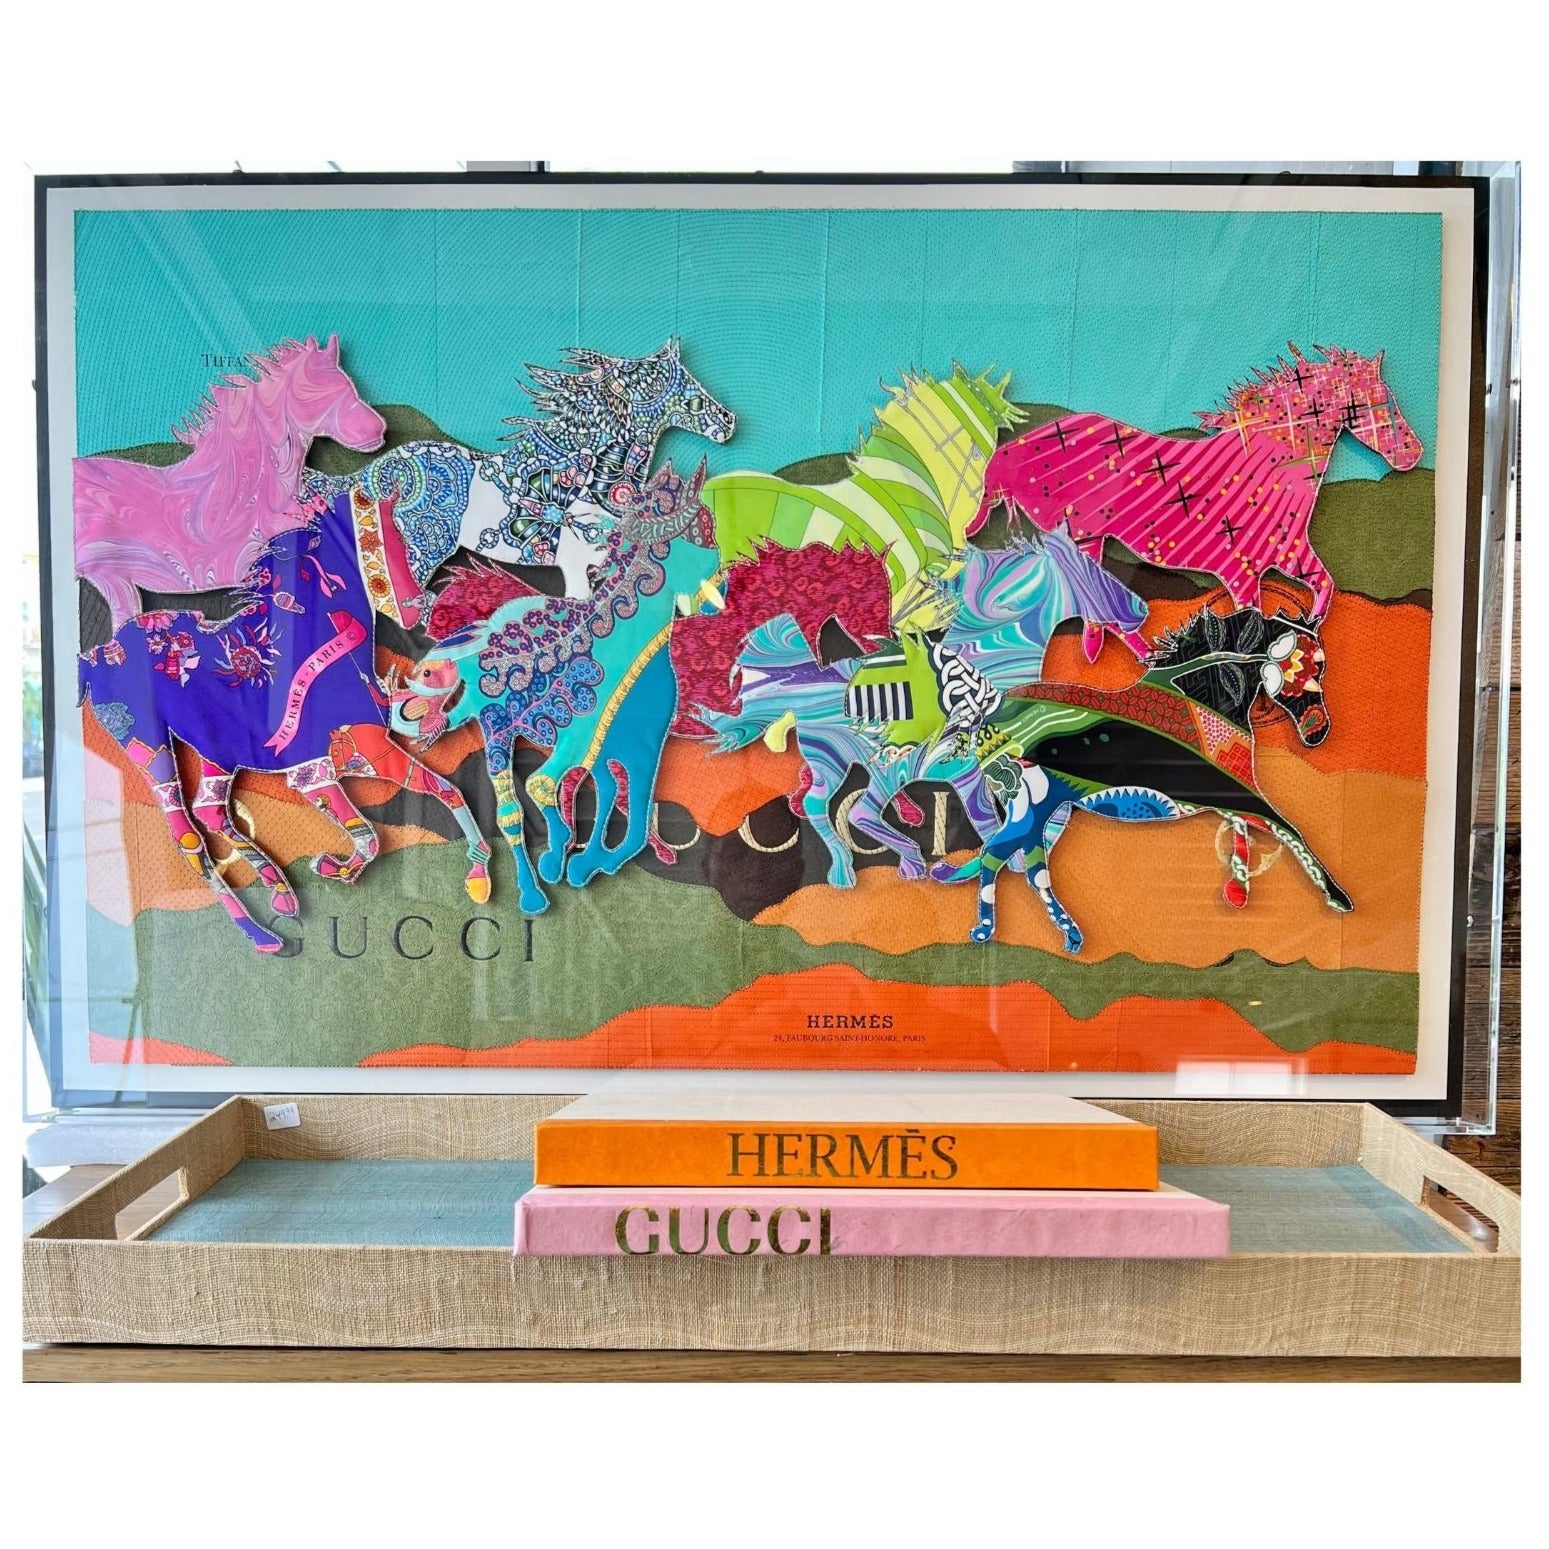 Herd of horses made ffrom Hermes and Cuchi scarves and background then embroidered with intricately designed  Mounted in acrylic box